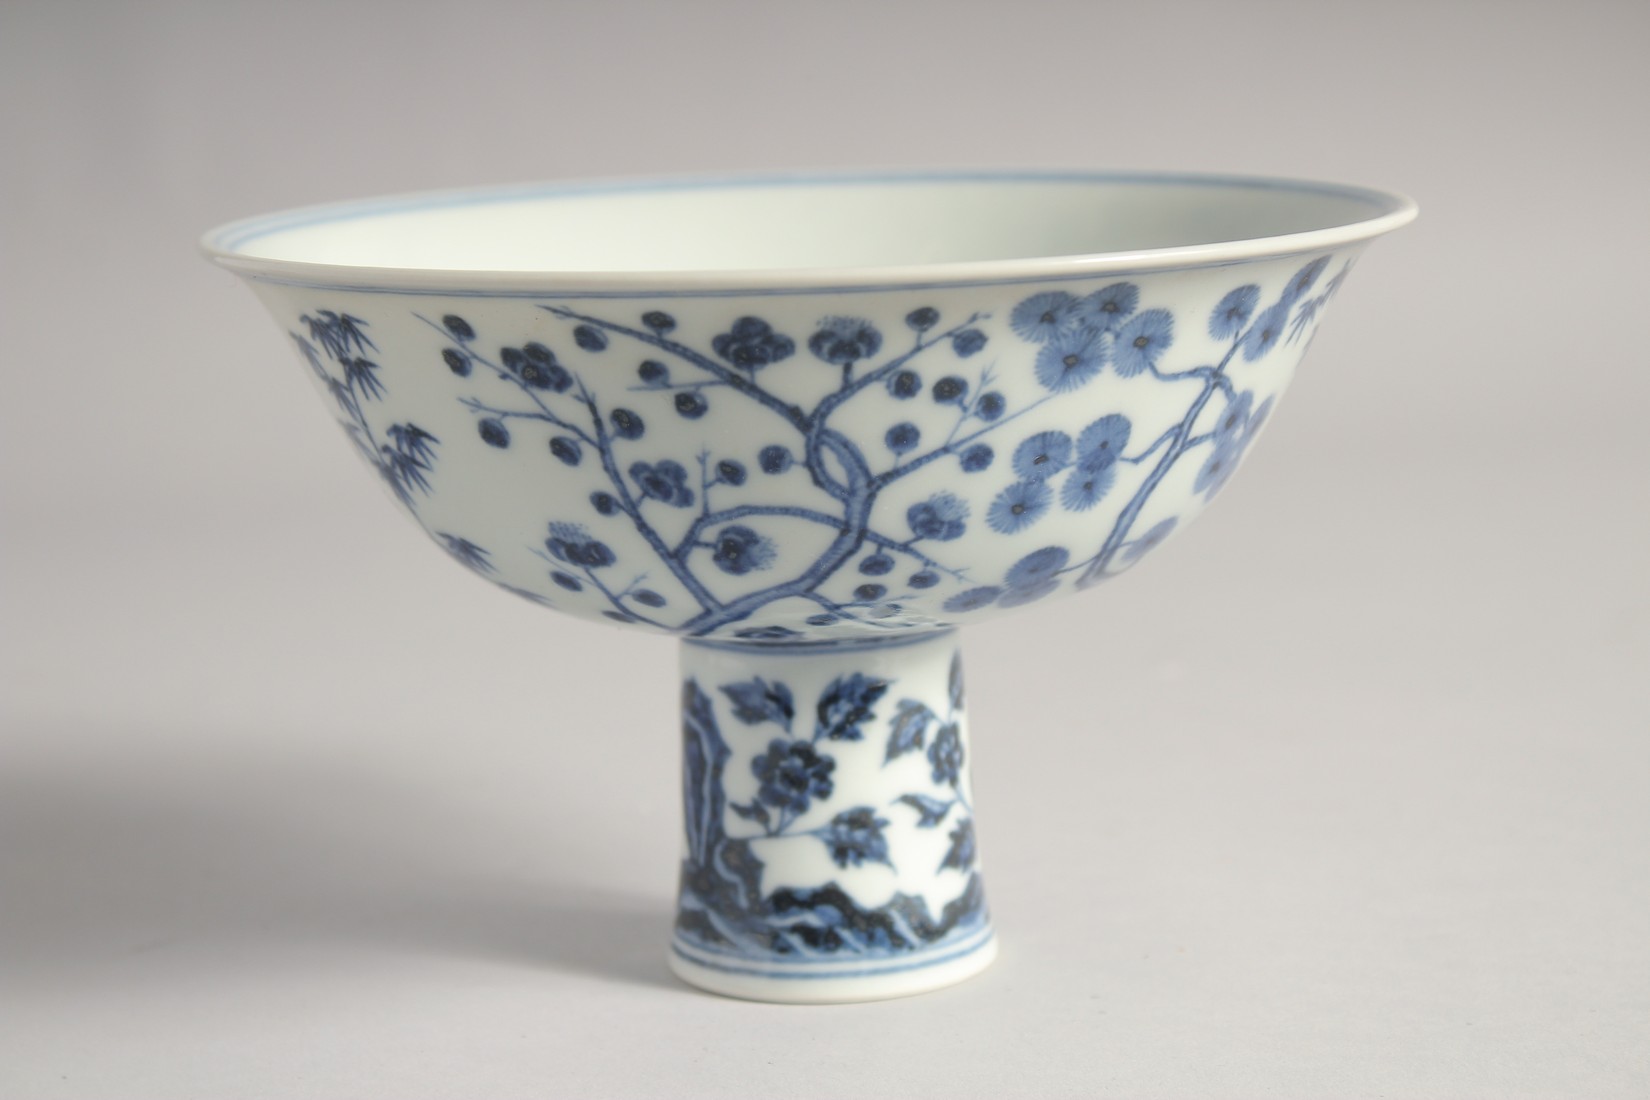 A CHINESE BLUE AND WHITE PORCELAIN PEDESTAL BOWL, the interior with six-character mark, 17cm - Image 6 of 6